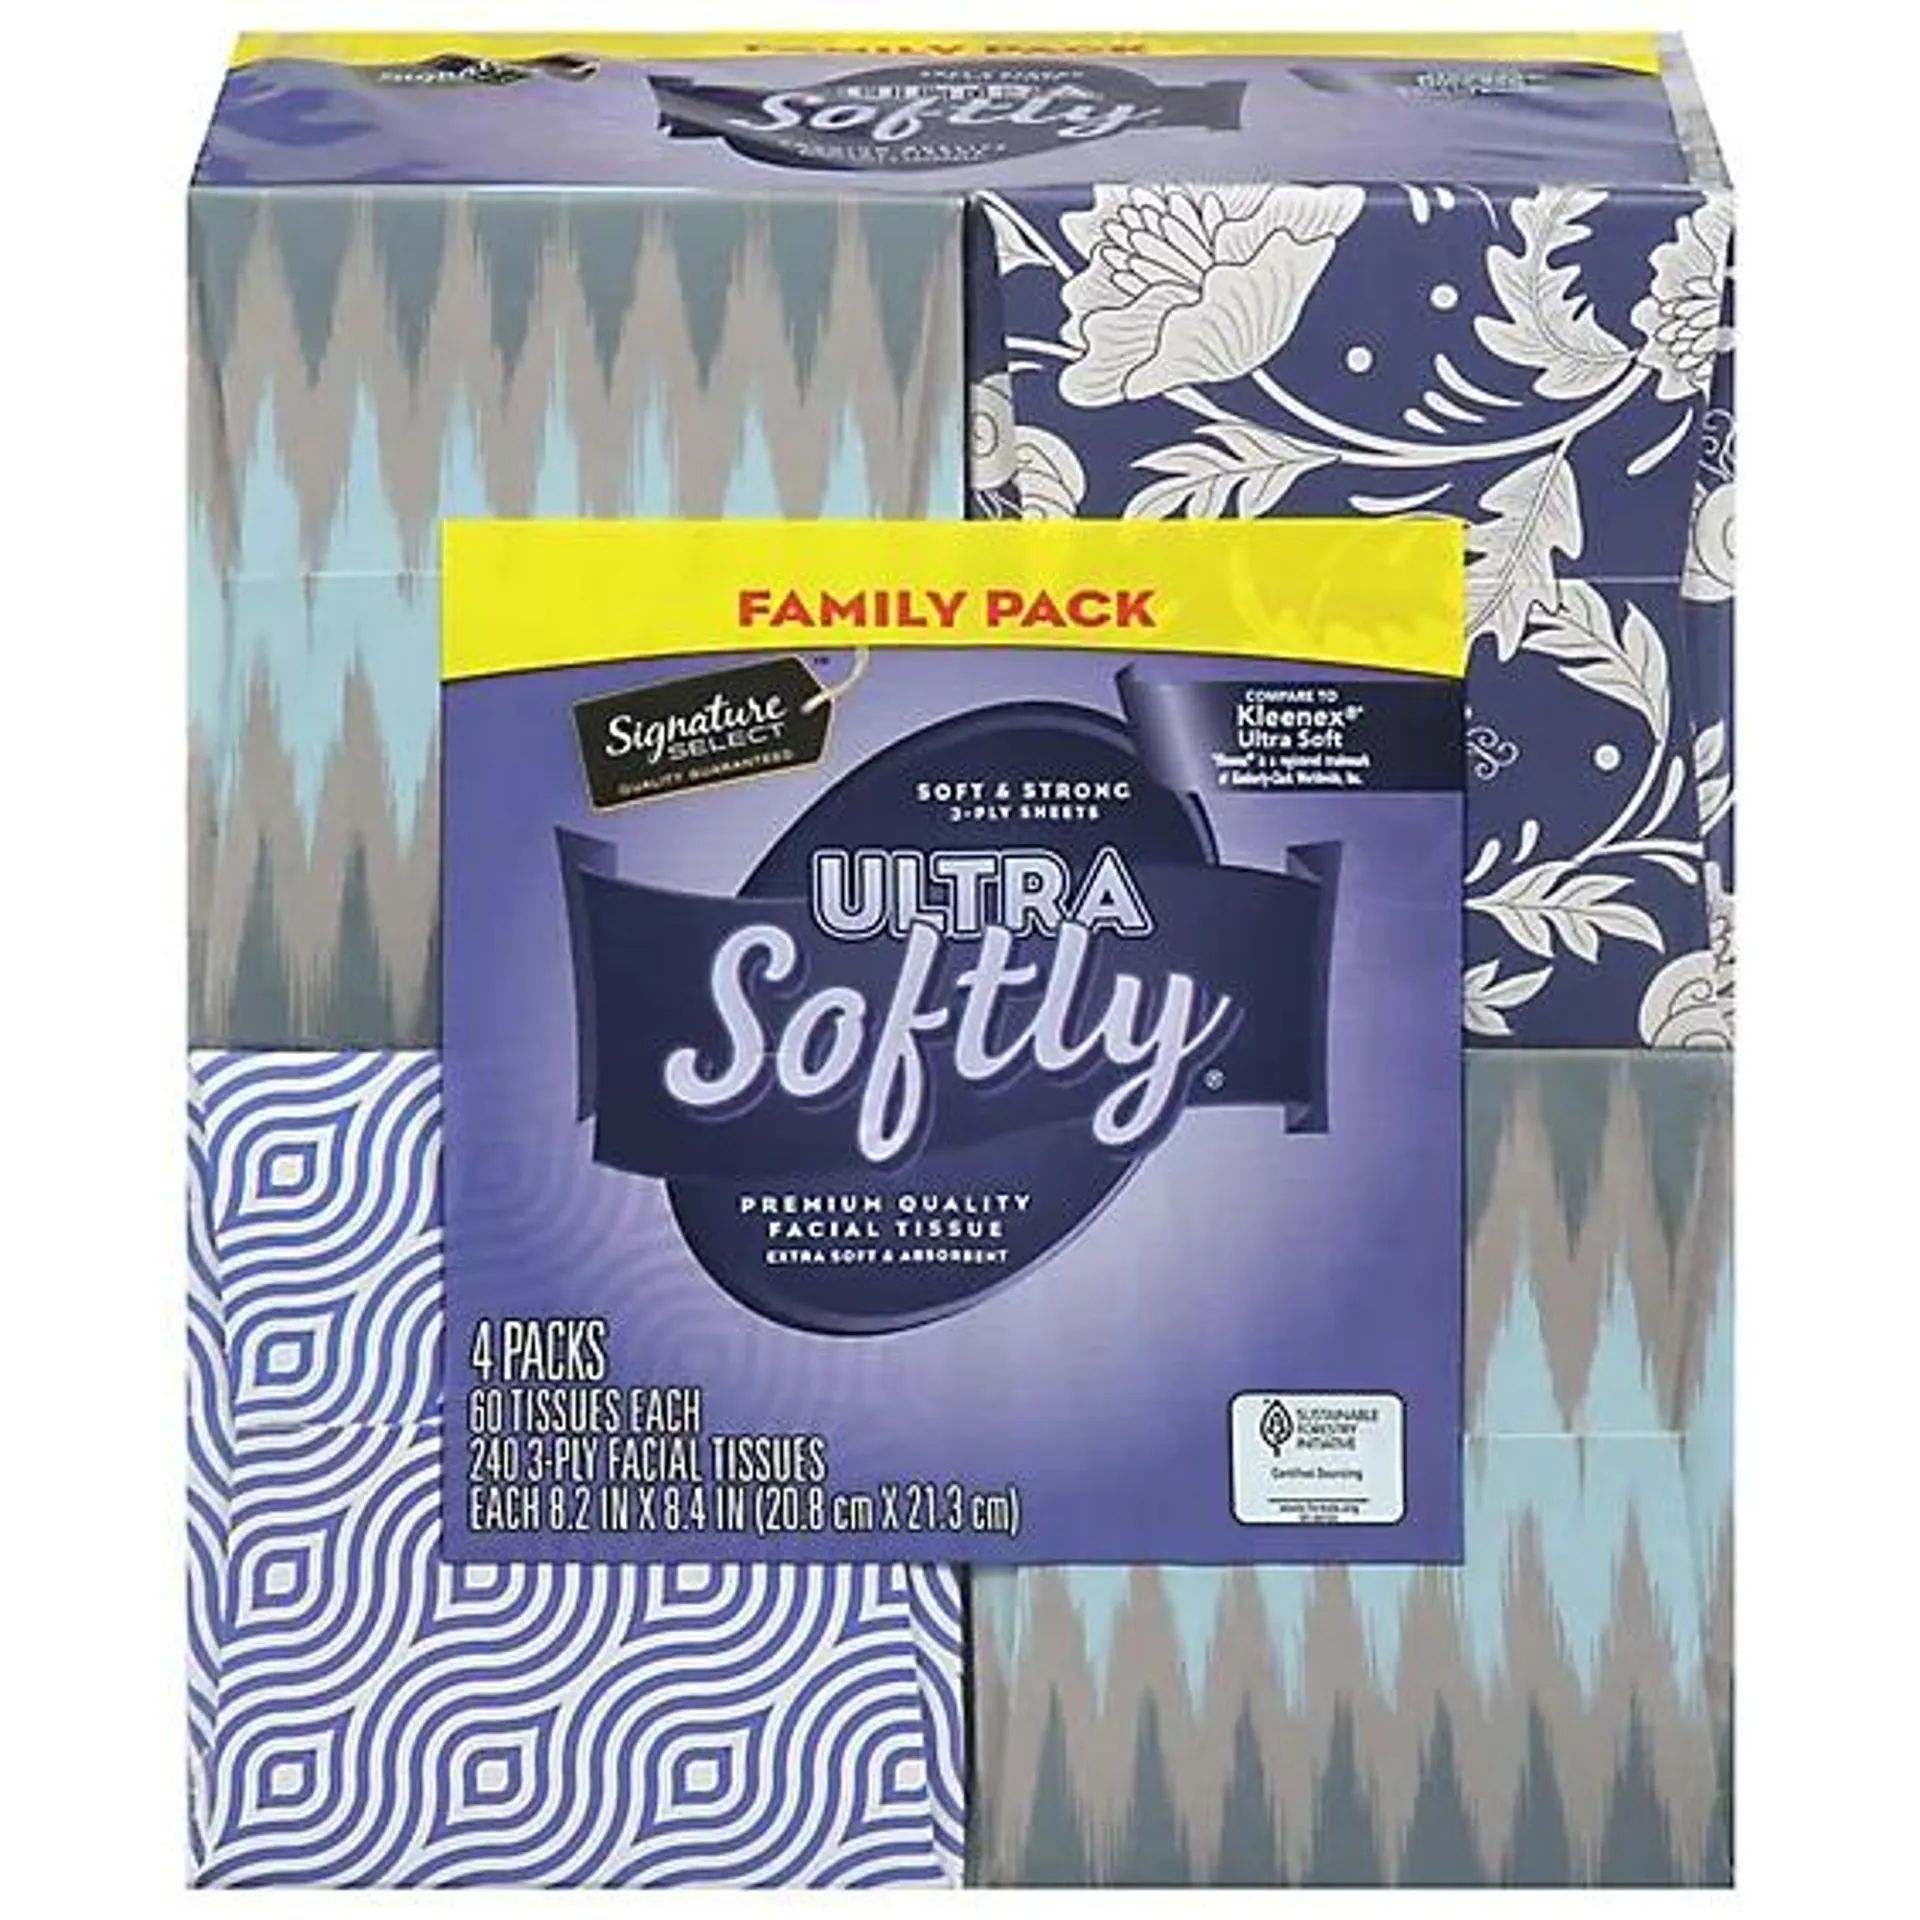 Signature SELECT Ultra Softly Facial Tissue Cube 4 Pack - 4 - 60 Count